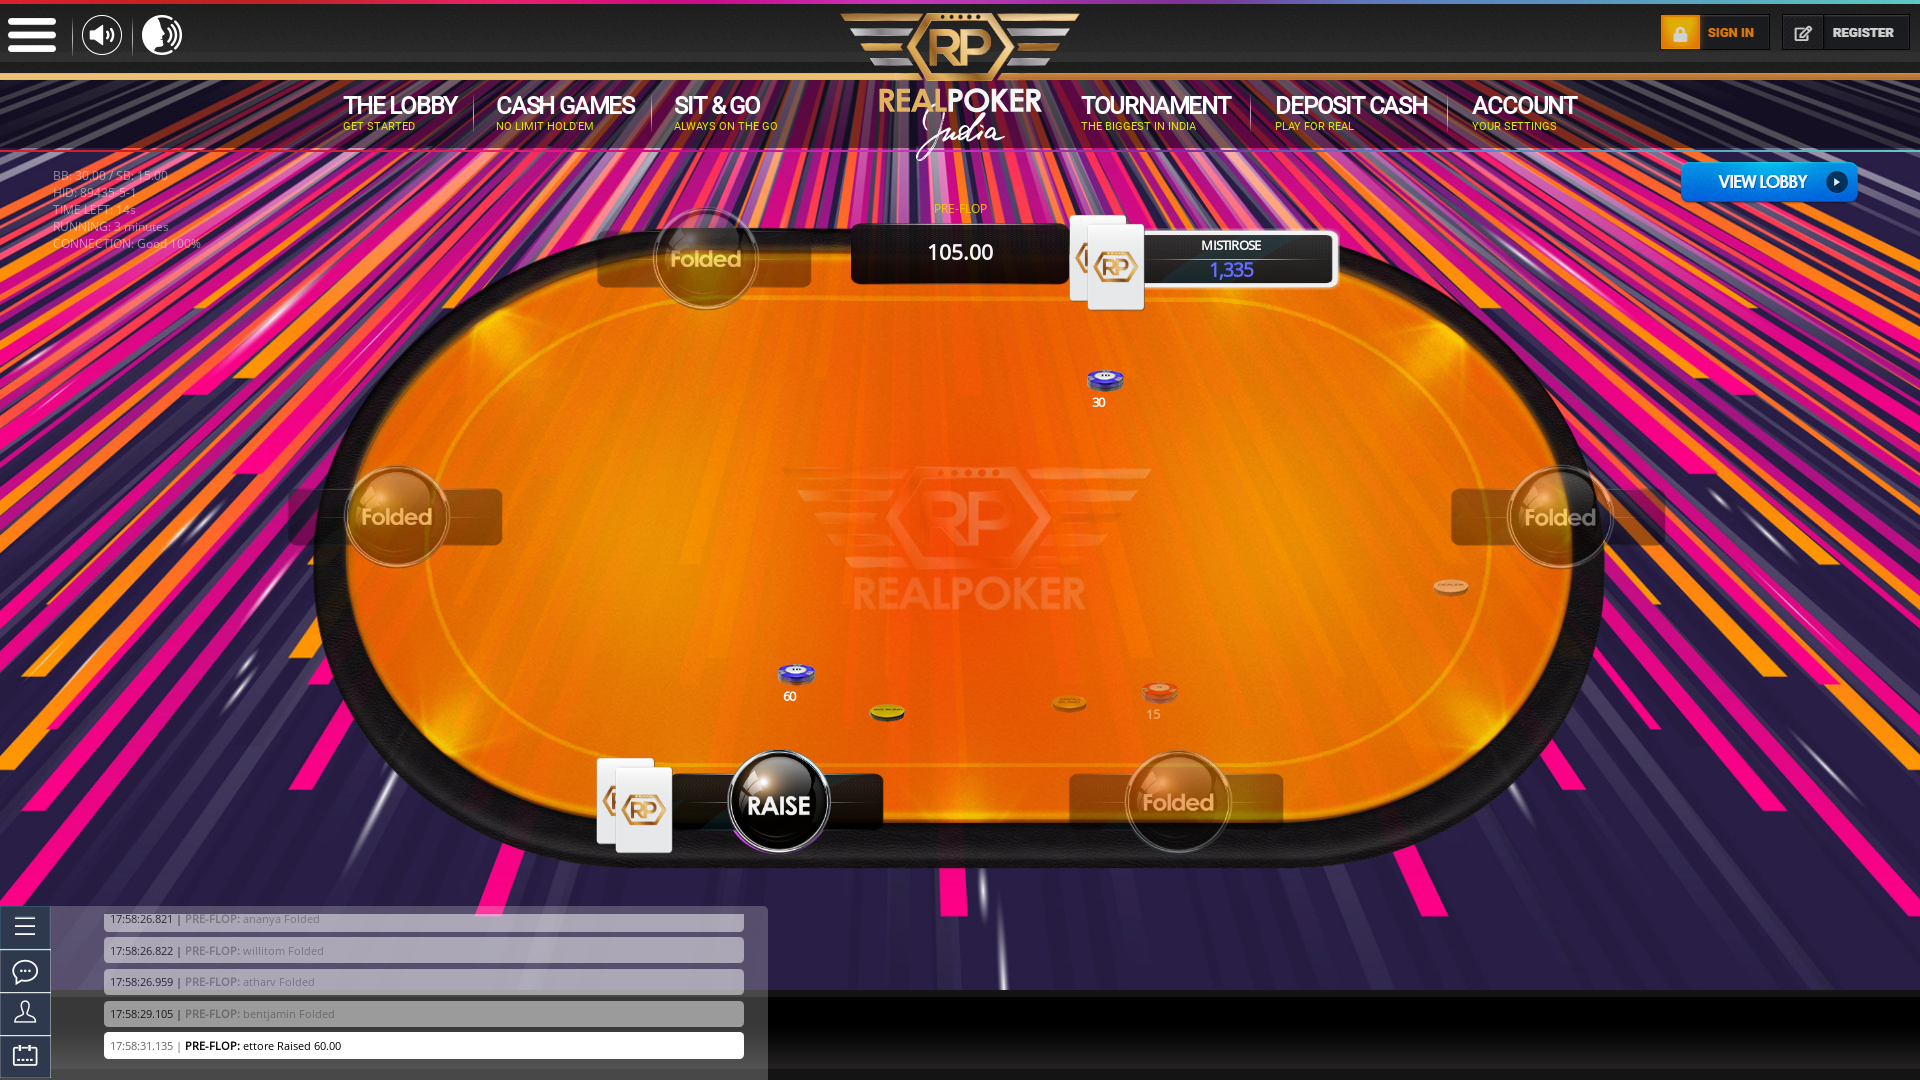 Real poker 6 player table in the 3rd minute